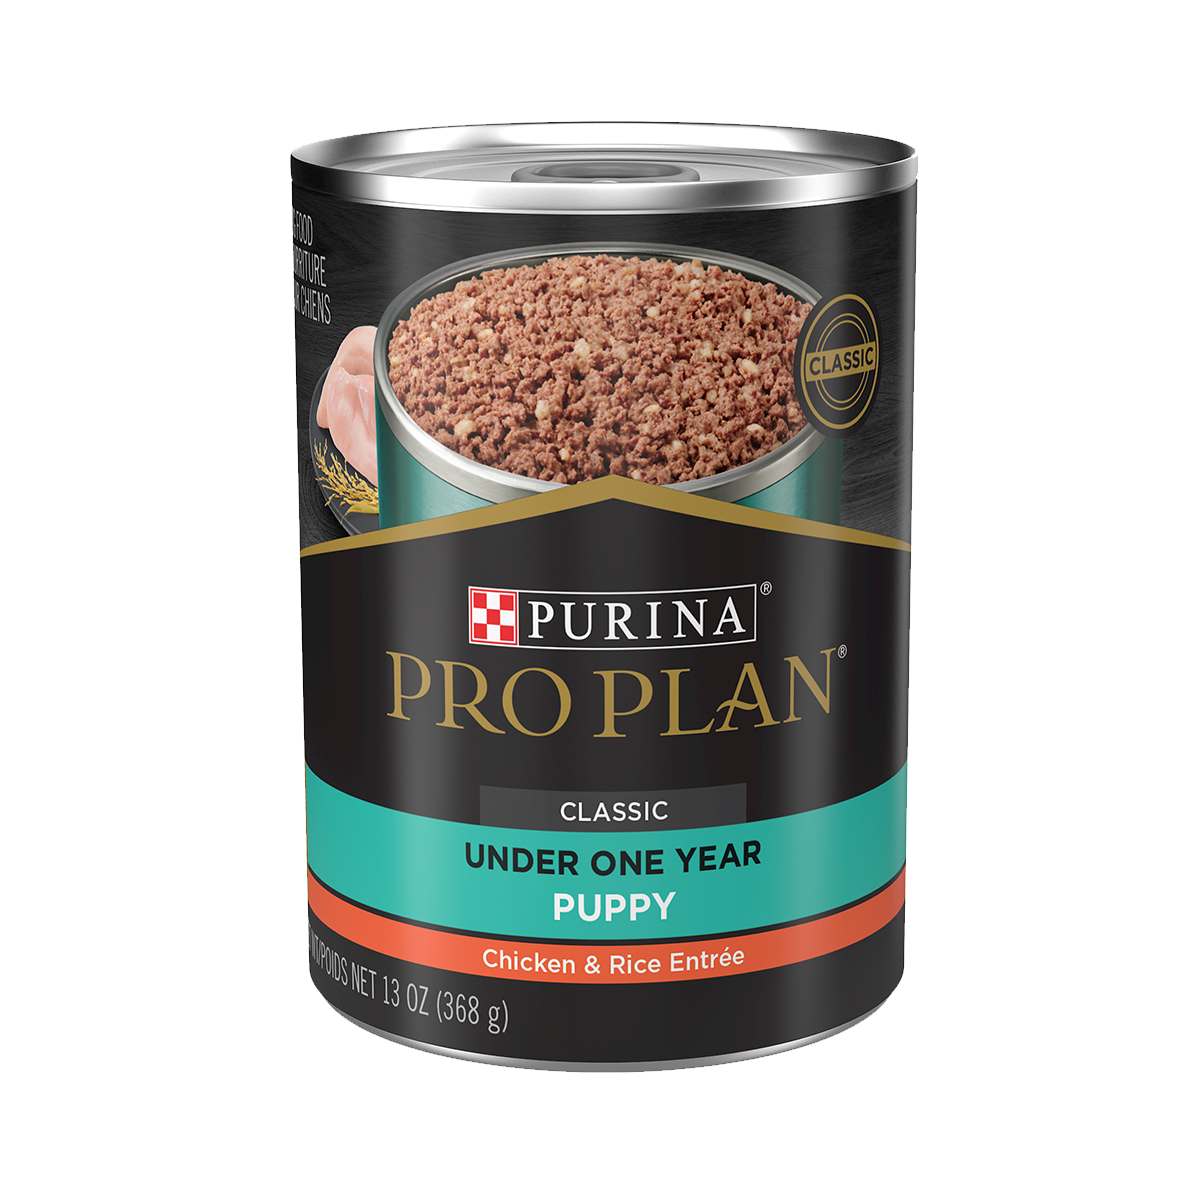 MX_Purina_Proplan_Lata_Perro_Puppy_FRONT.png